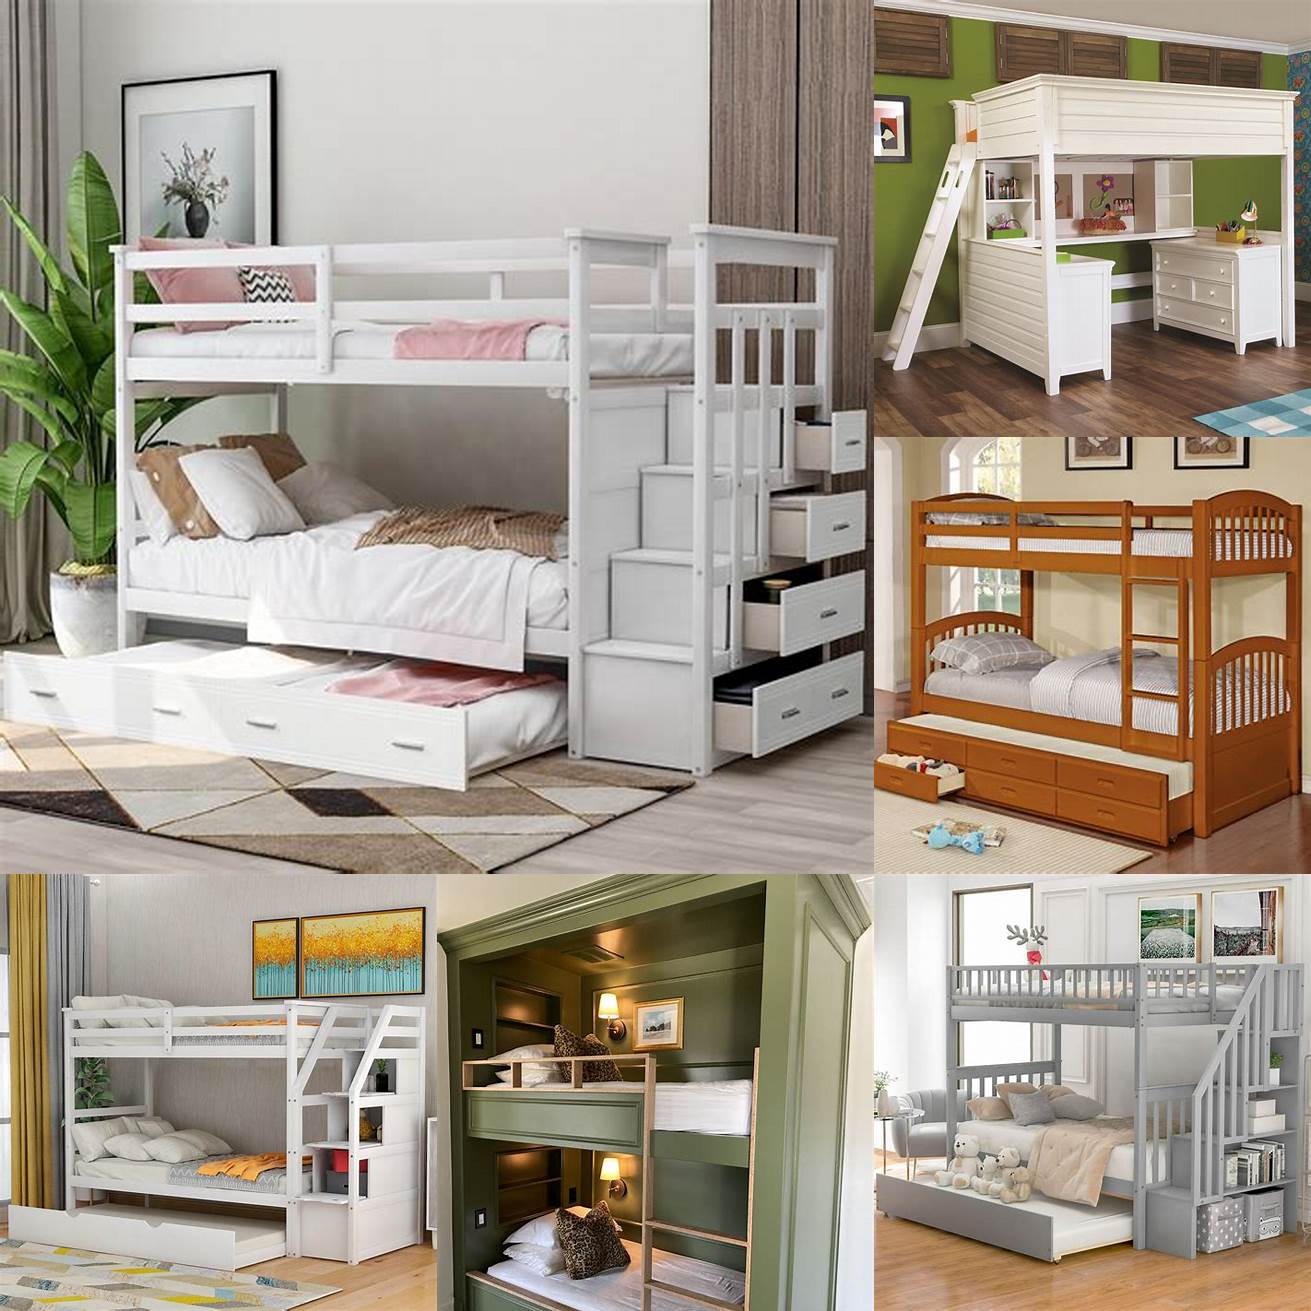 Additional features Look for bunk beds with built-in storage trundle beds or desks for added functionality